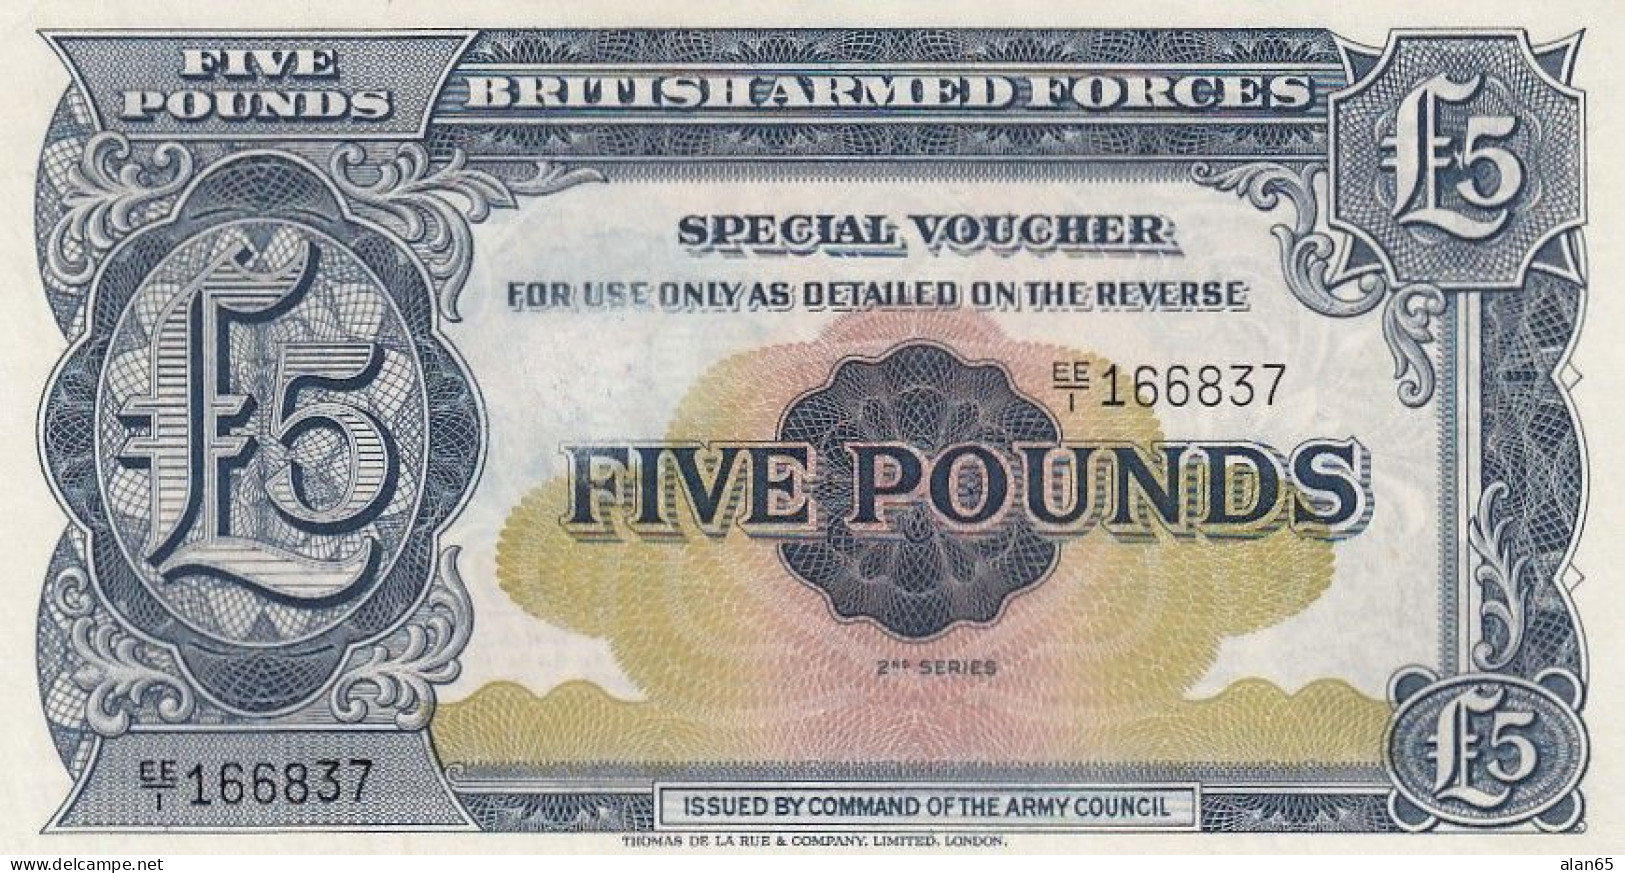 Great Britain #M23, 5 Pounds 2nd Series British Armed Forces Paper Money - British Armed Forces & Special Vouchers